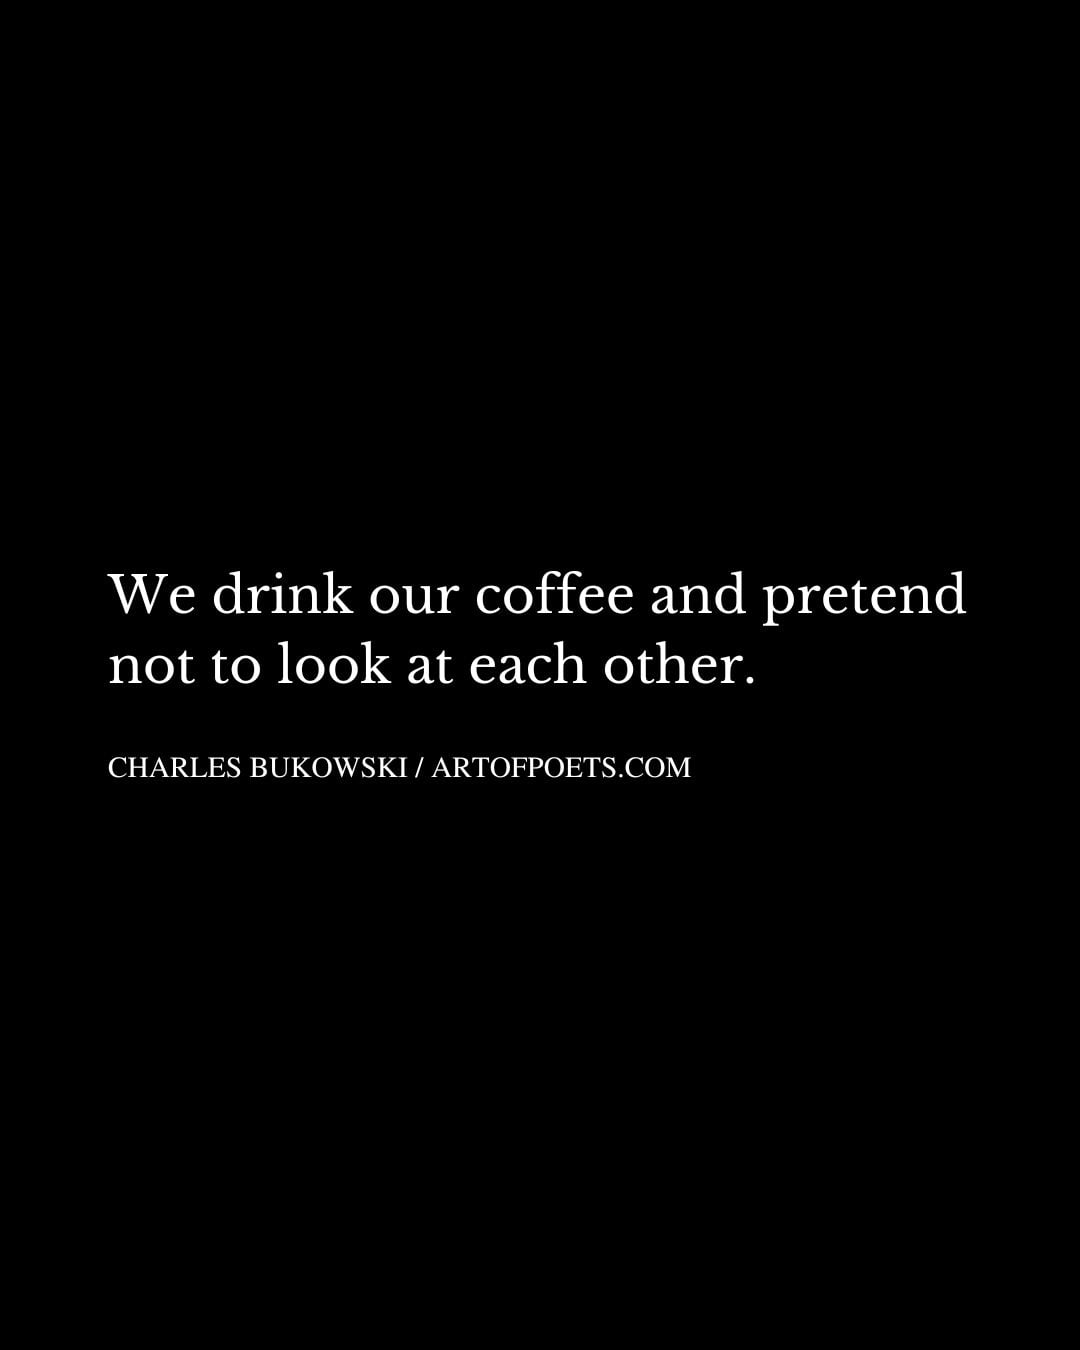 We drink our coffee and pretend not to look at each other